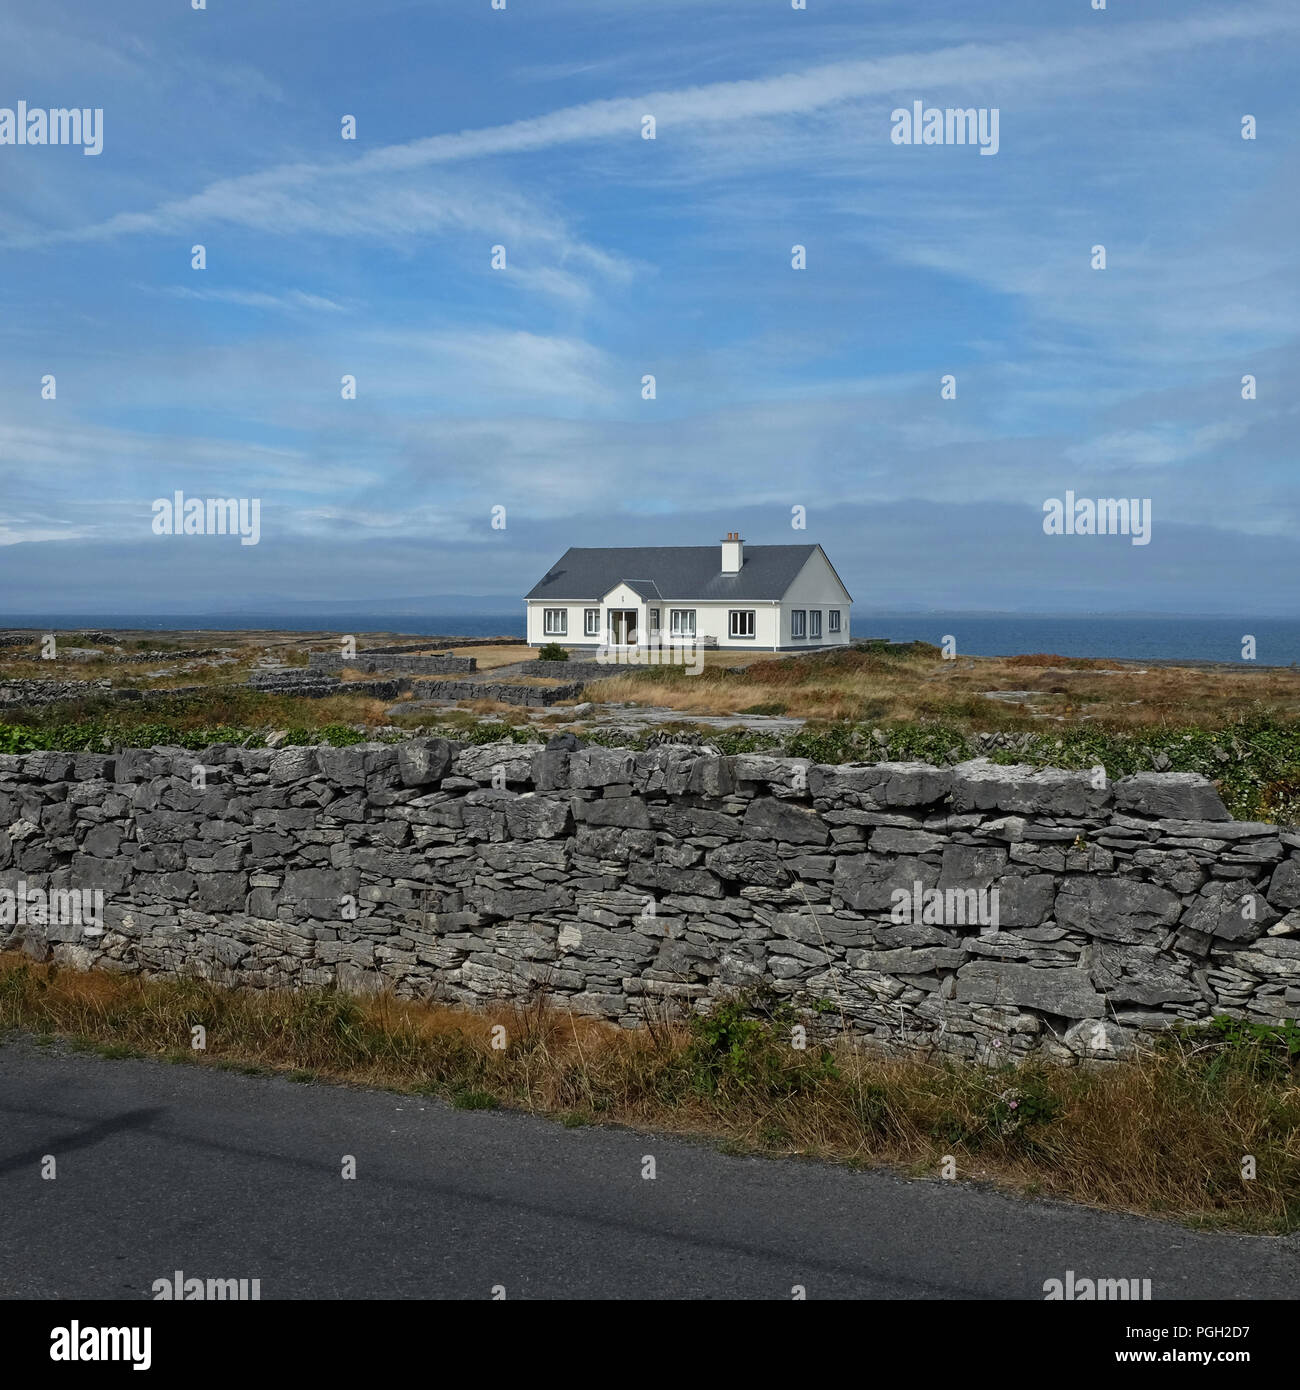 Bungalow on Inishmore, Aran Islands, County Galway Stock Photo